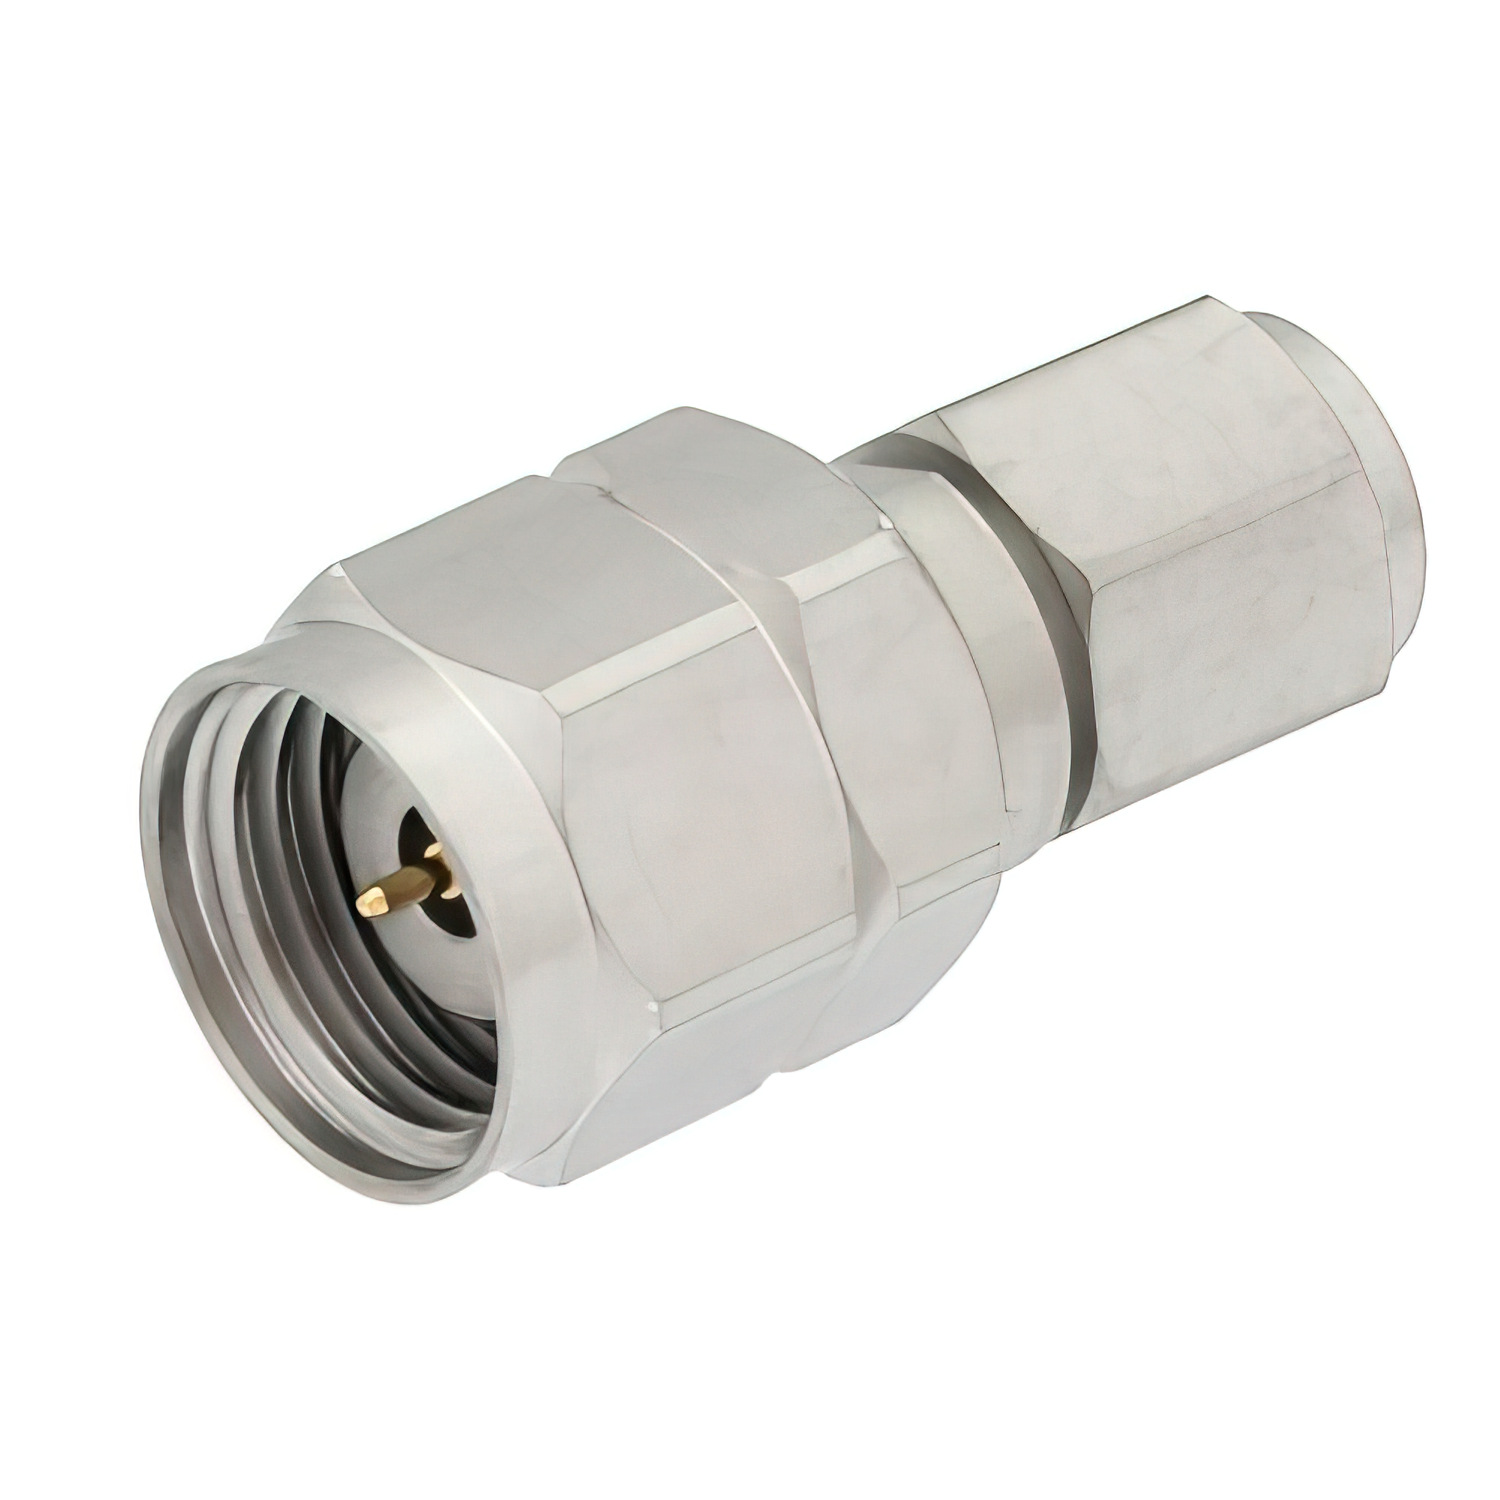 1.0mm male to 1.85mm male adapter2